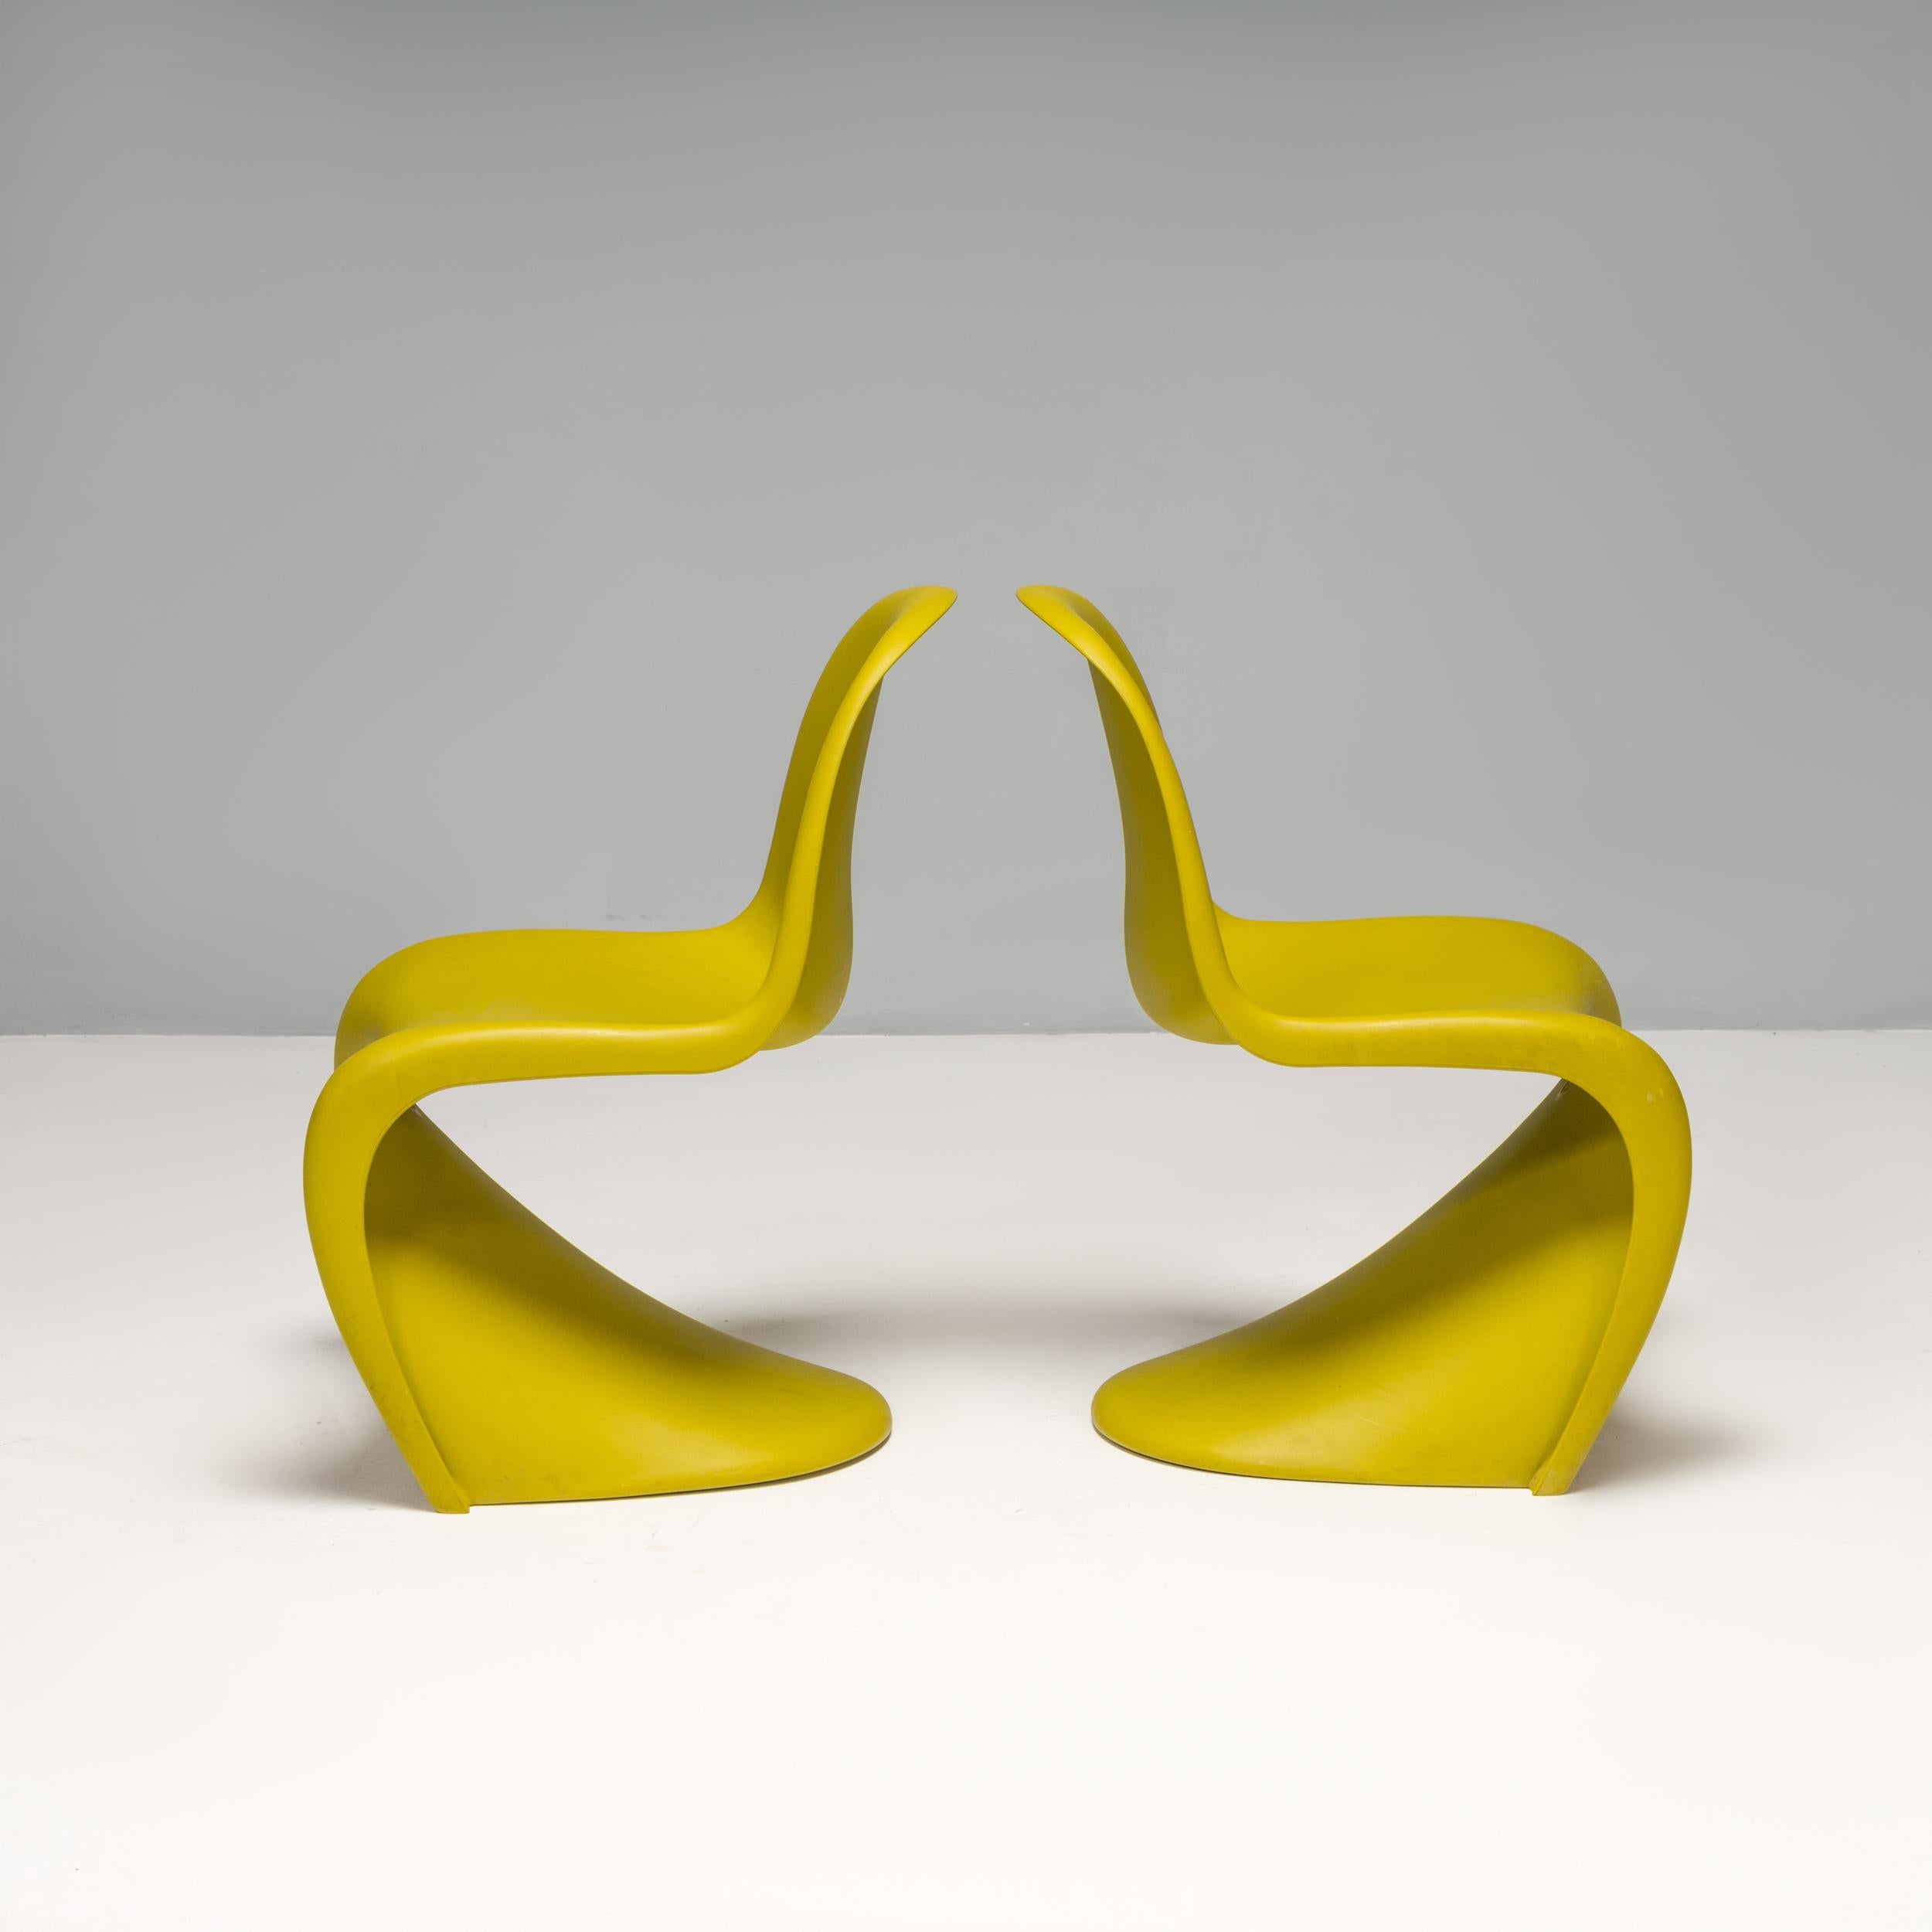 The panton chair was designed by Verner Panton in 1960 and developed for production with vitra in 1967, making history as the first chair to be manufactured in a single piece from plastic.

The most recent iteration was created in 1999 and the